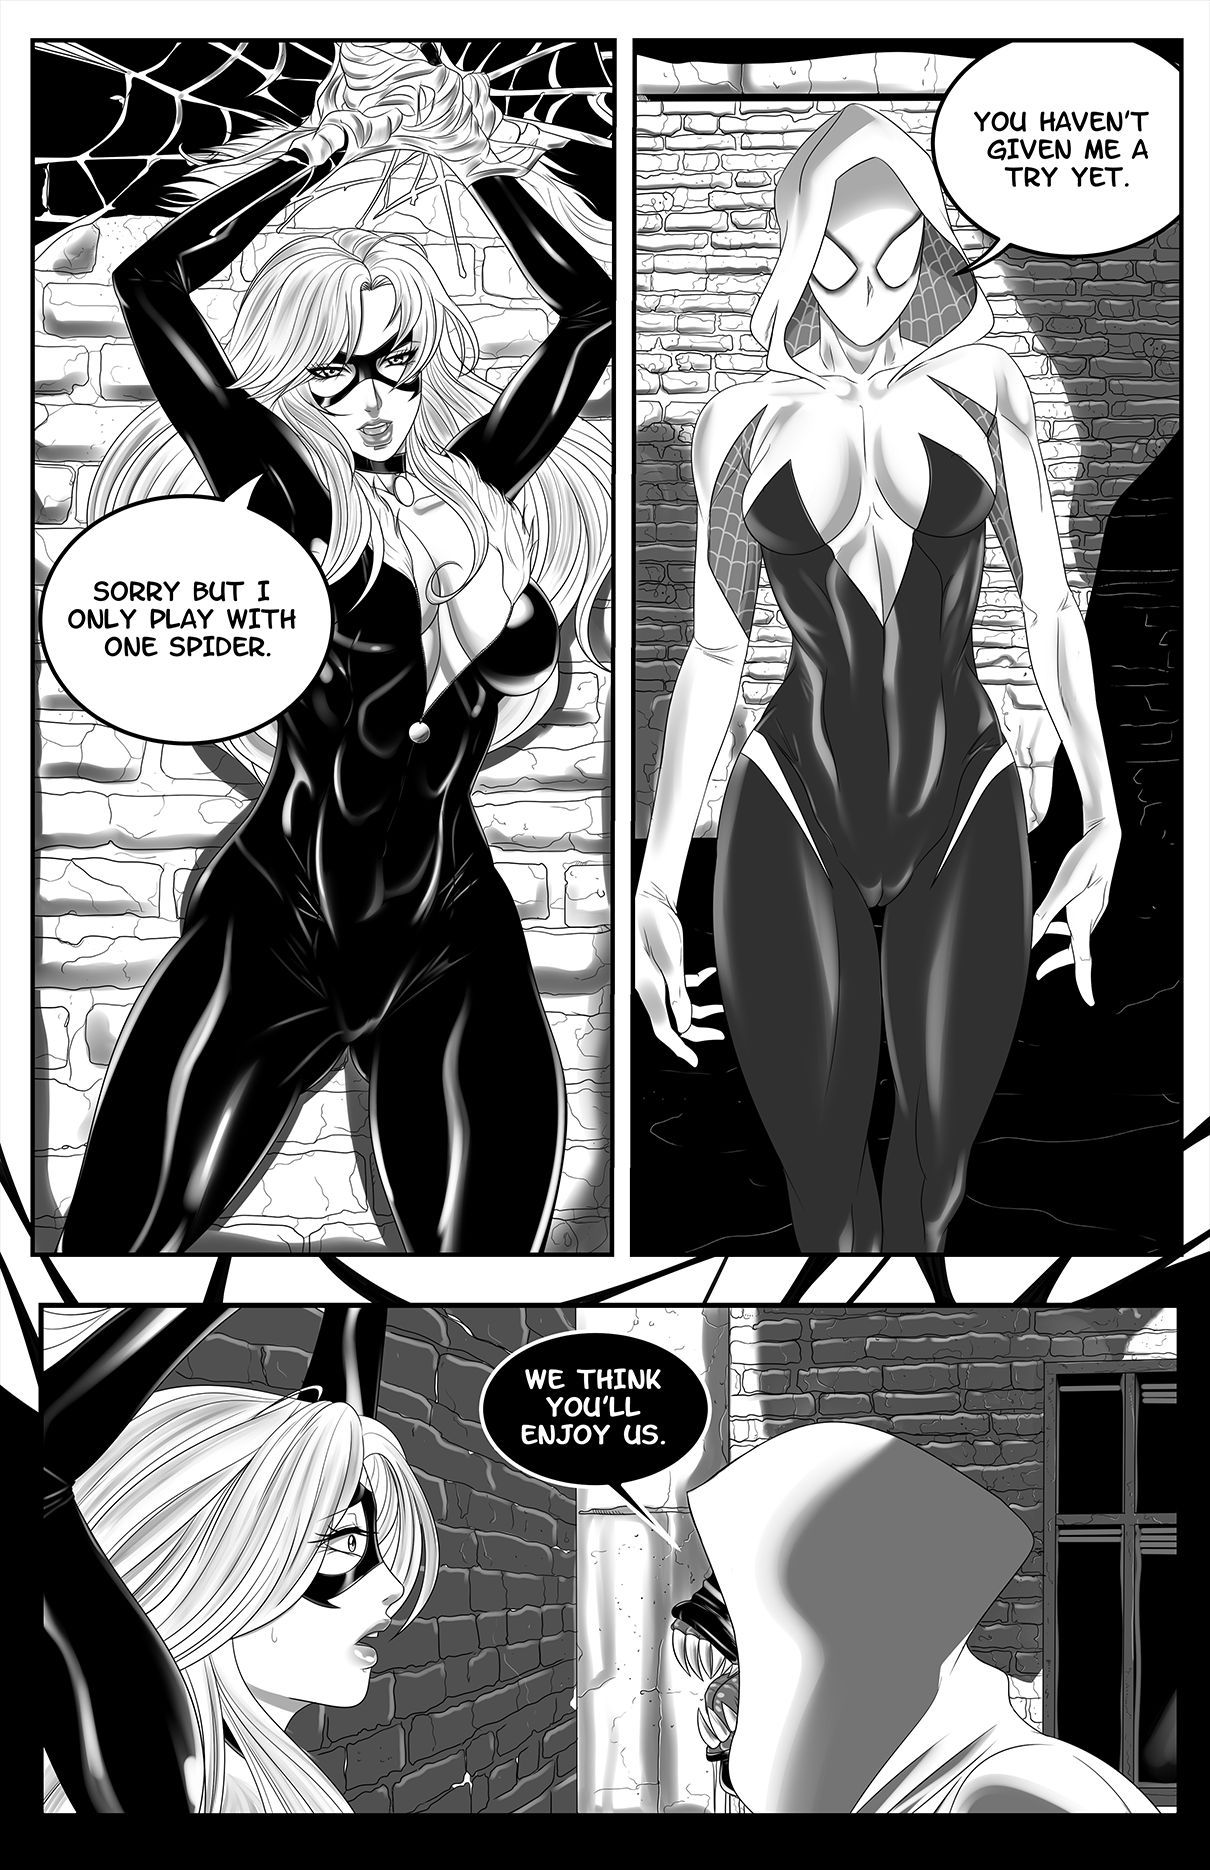 [Naranjou] Felicia's Spider-Problem (Spider-Man) [Ongoing] 1